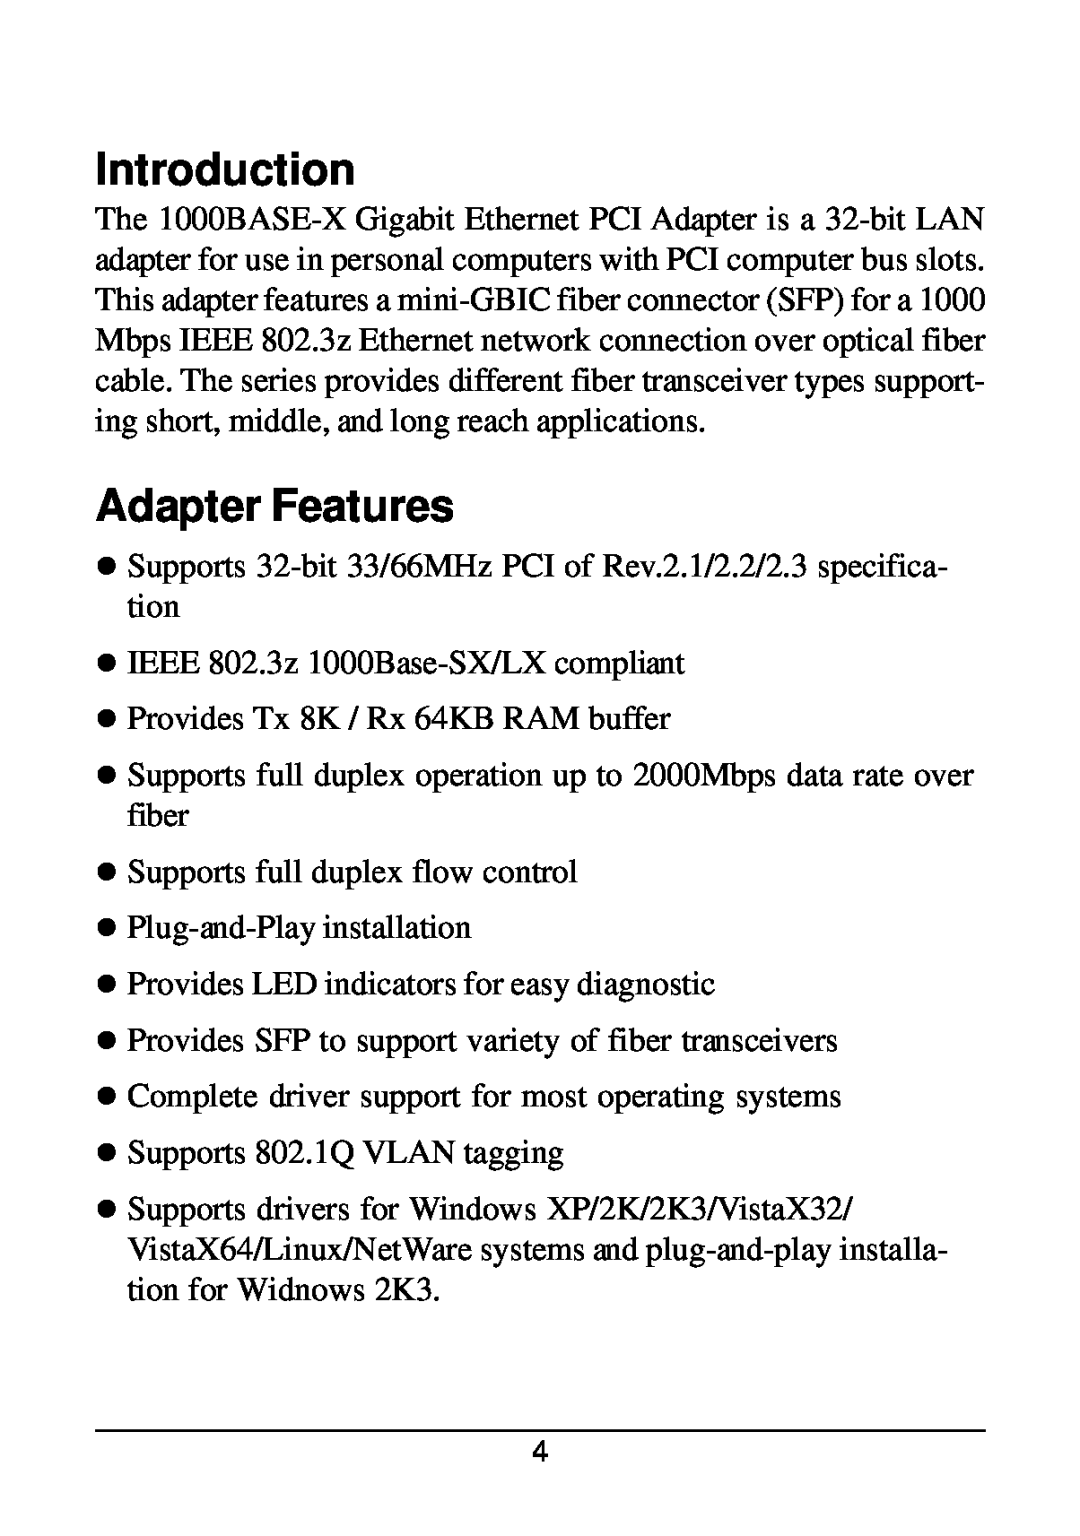 KTI Networks KG-500F manual Introduction, Adapter Features 